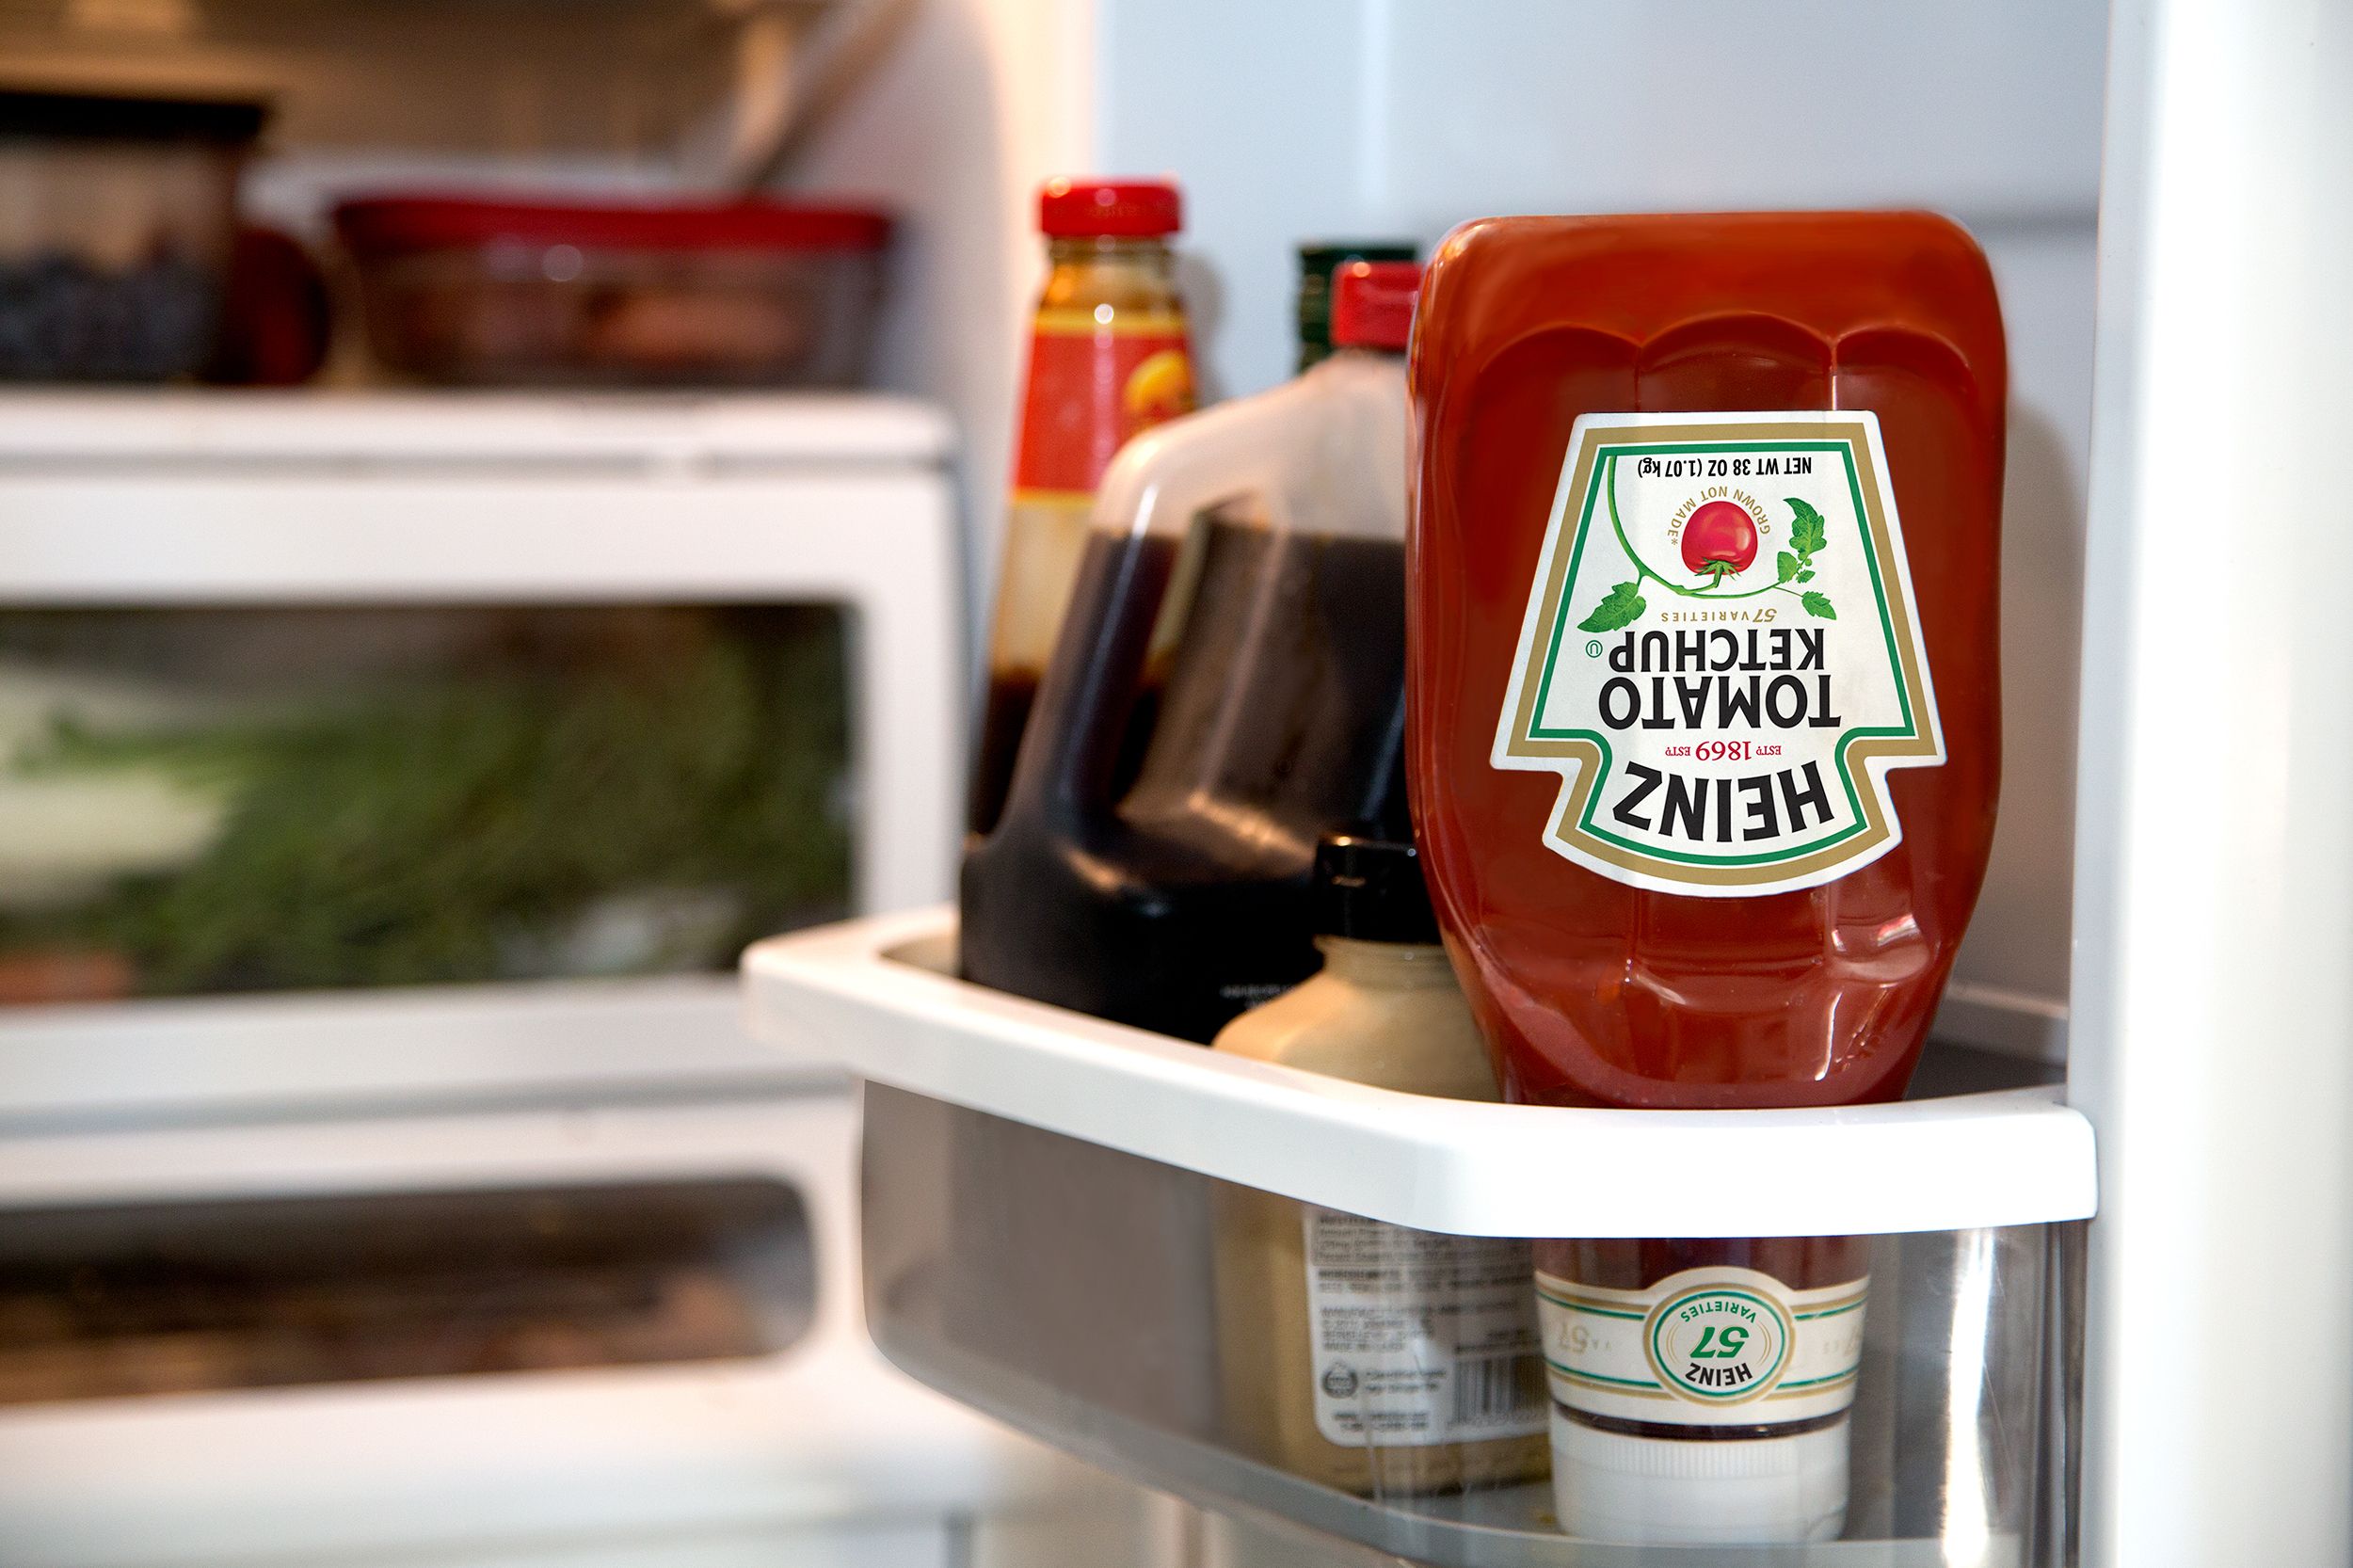 Heinz ketchup bottle placed upside down in a refrigerator next to other condiments